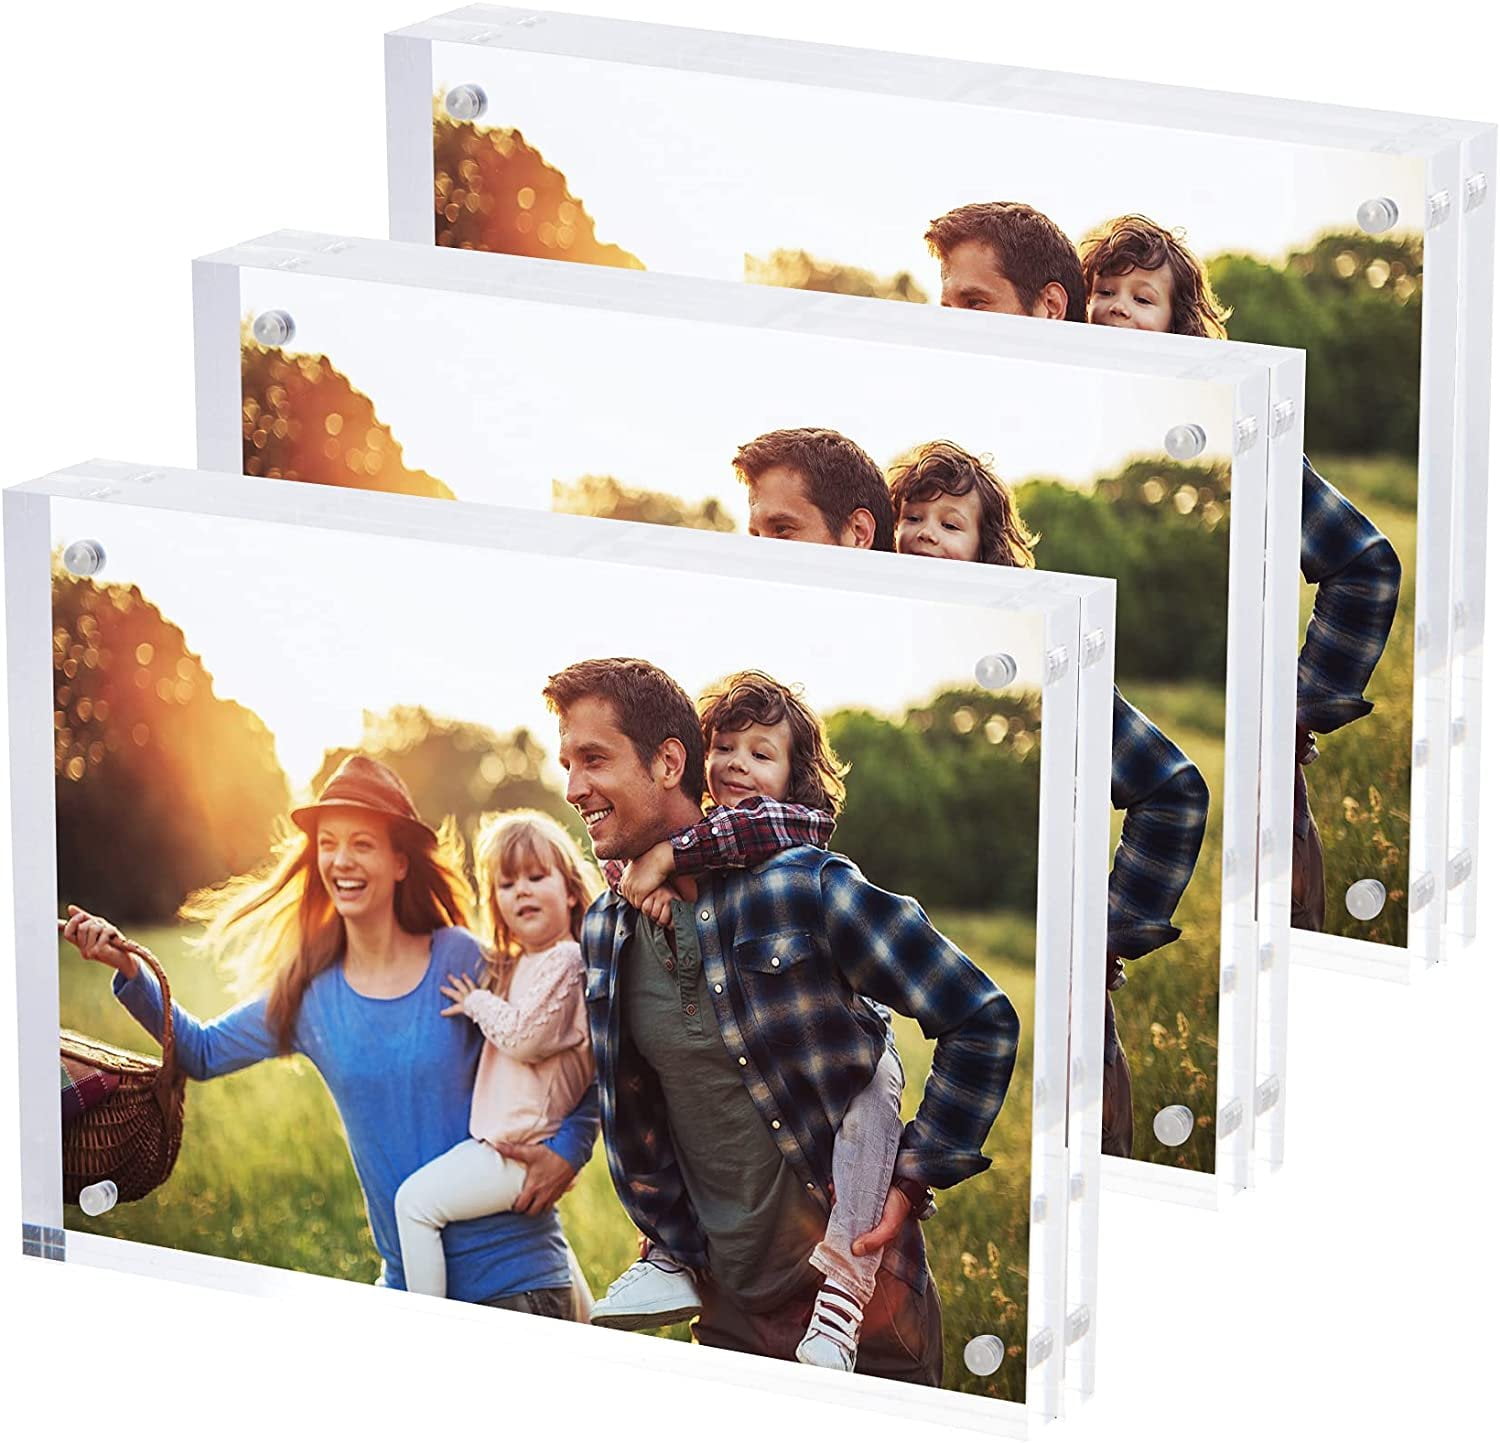 2x Acrylic Photo Frame Magnetic Photo Holder Clear Picture Frame Freestand 8x10" 